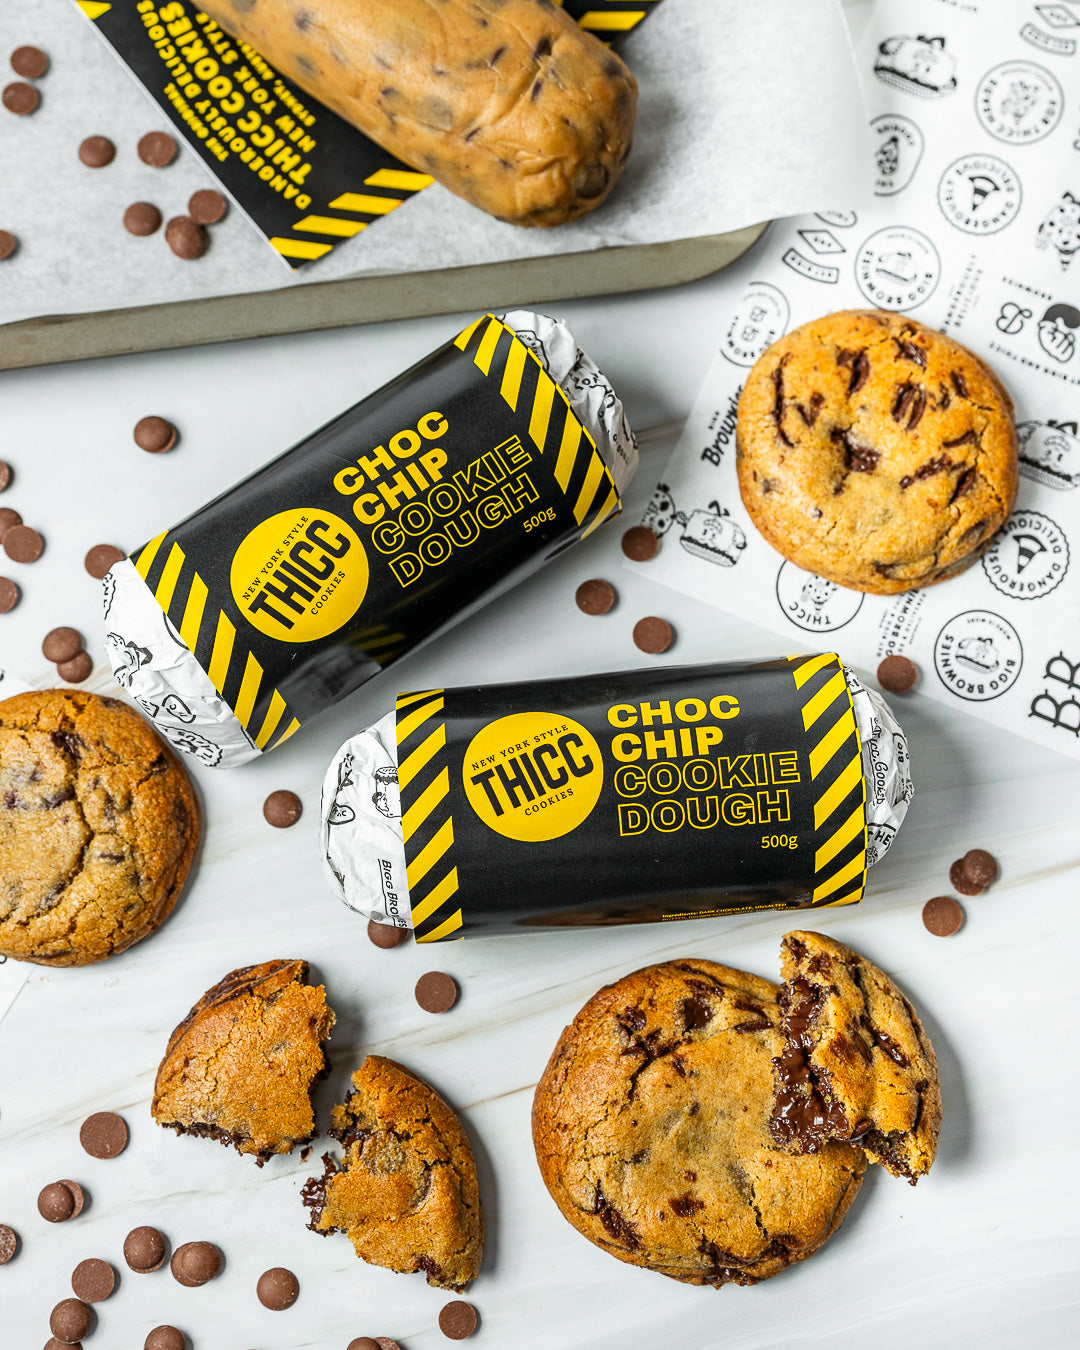 Get Ready to Indulge with THICC Cookie Dough Now Available at Coles Supermarkets!